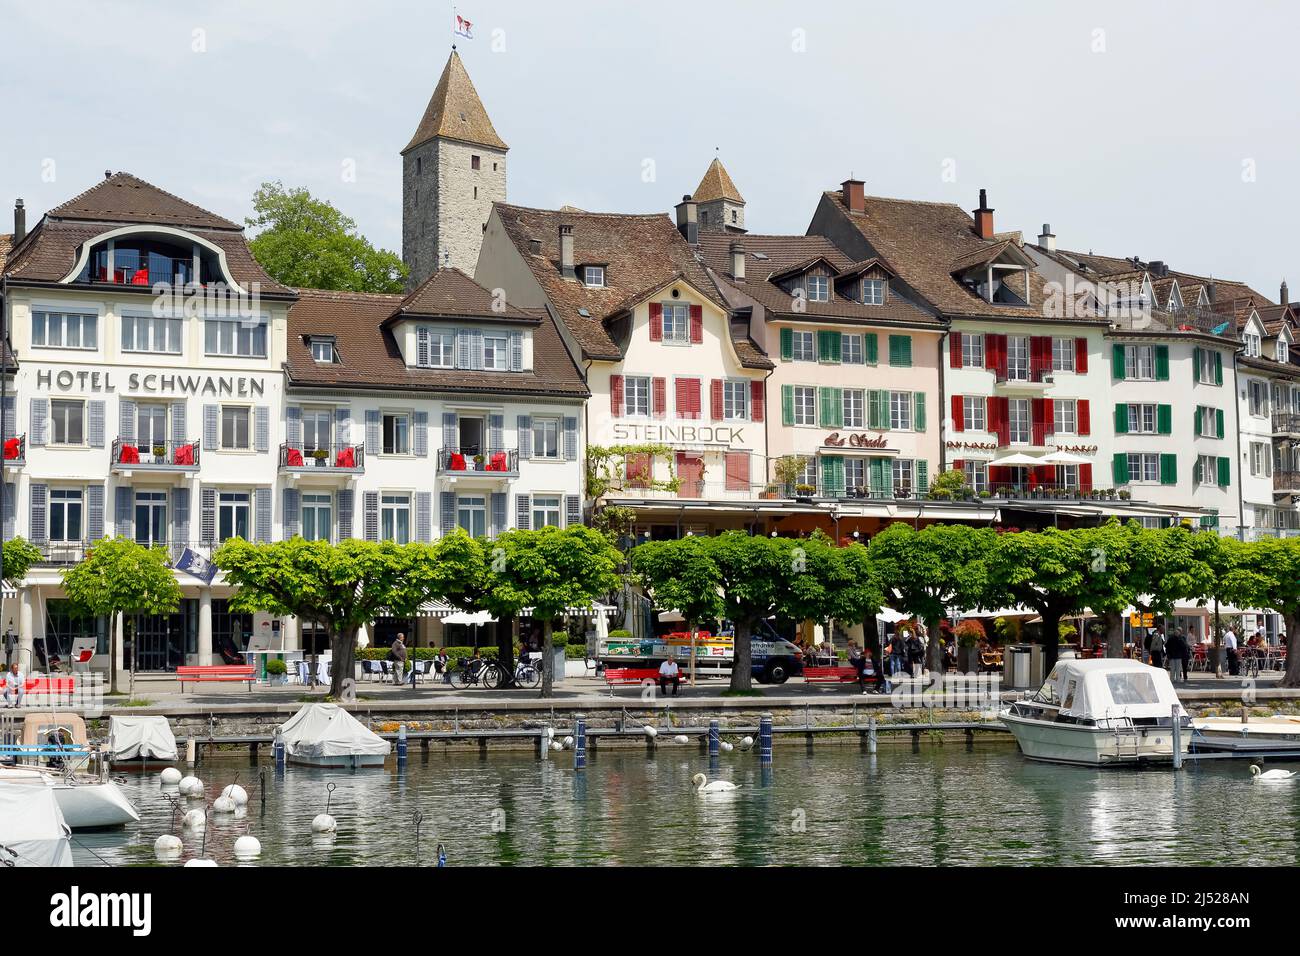 Rapperswil, Switzerland - May 10, 2016: Buildings, hotels and moored boats along promenade by the lakeside, all this shows the diversity of tourist at Stock Photo